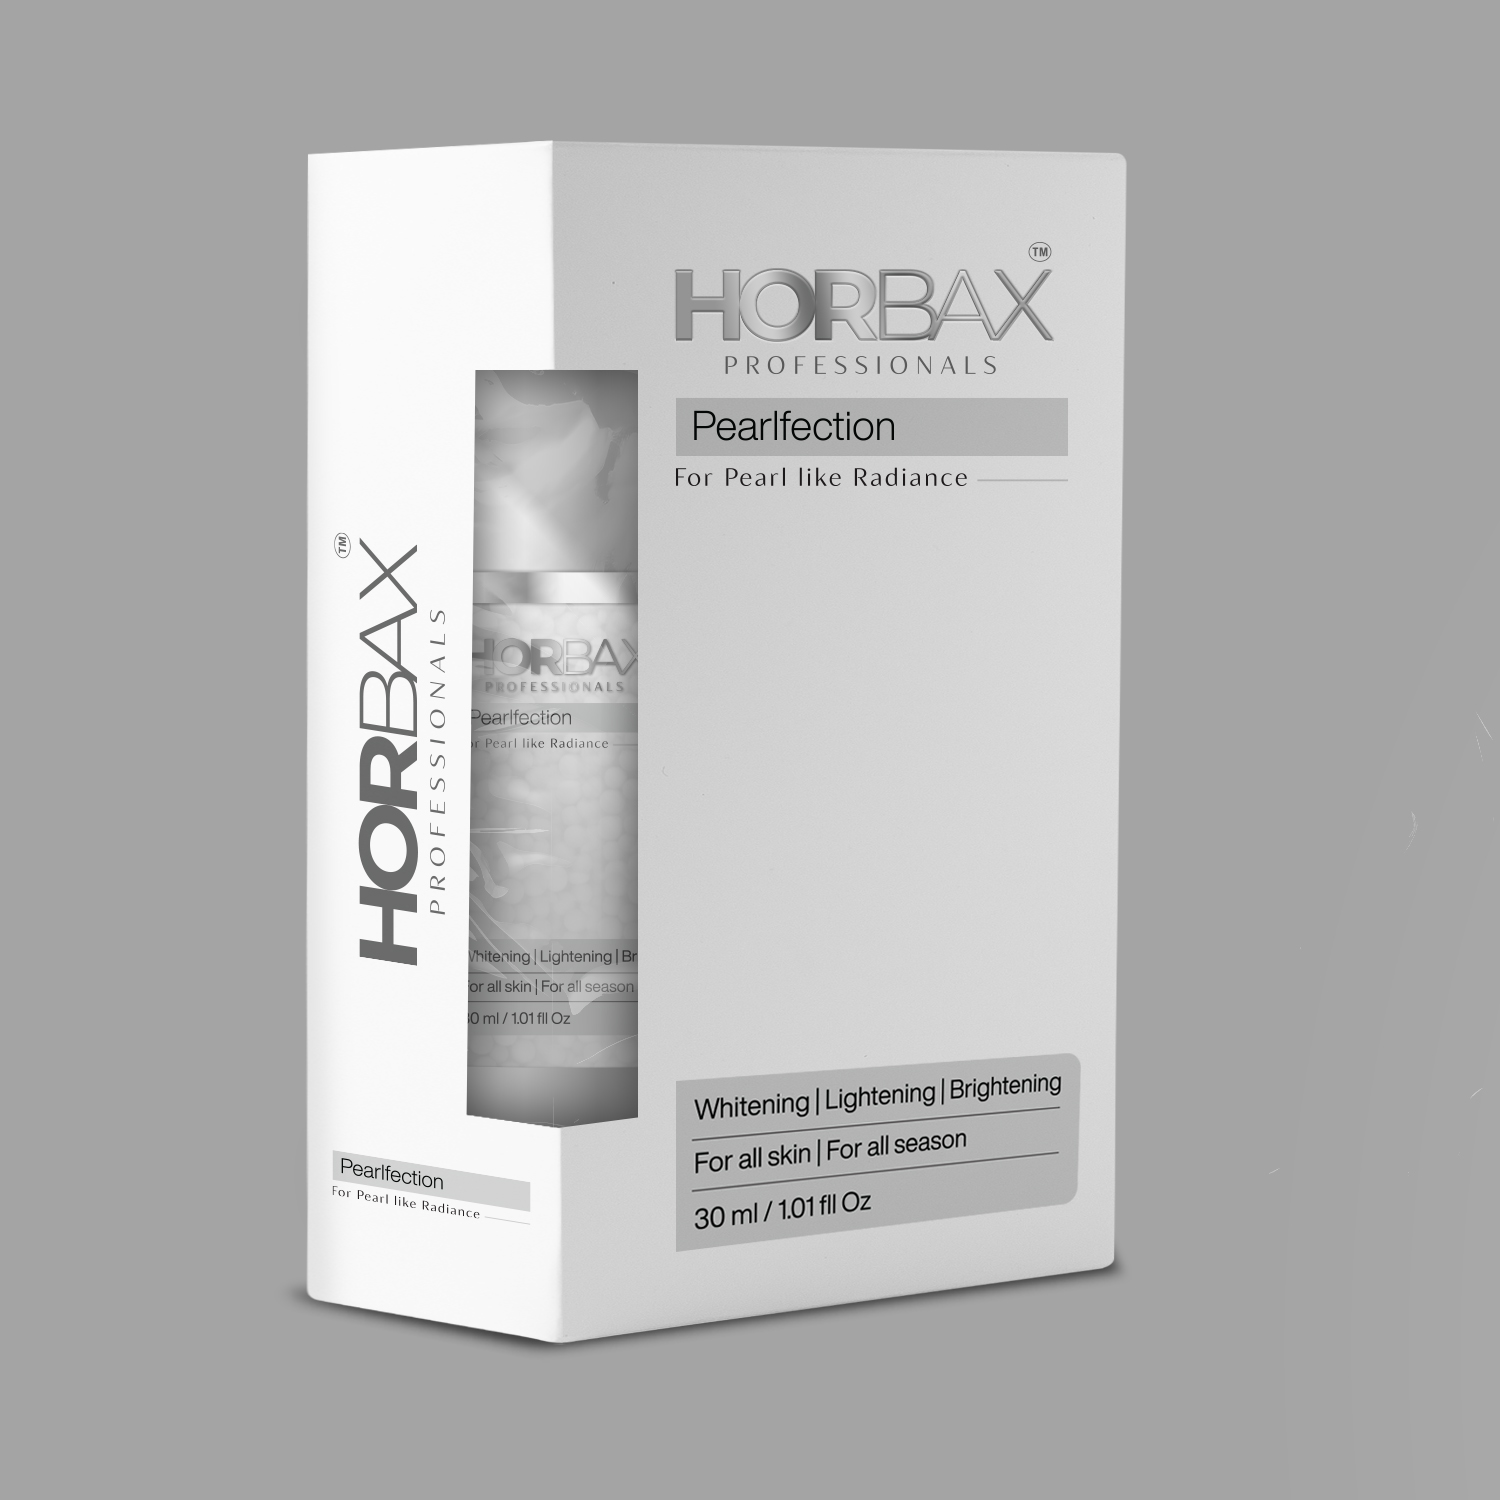 Pearlfection by horbax india